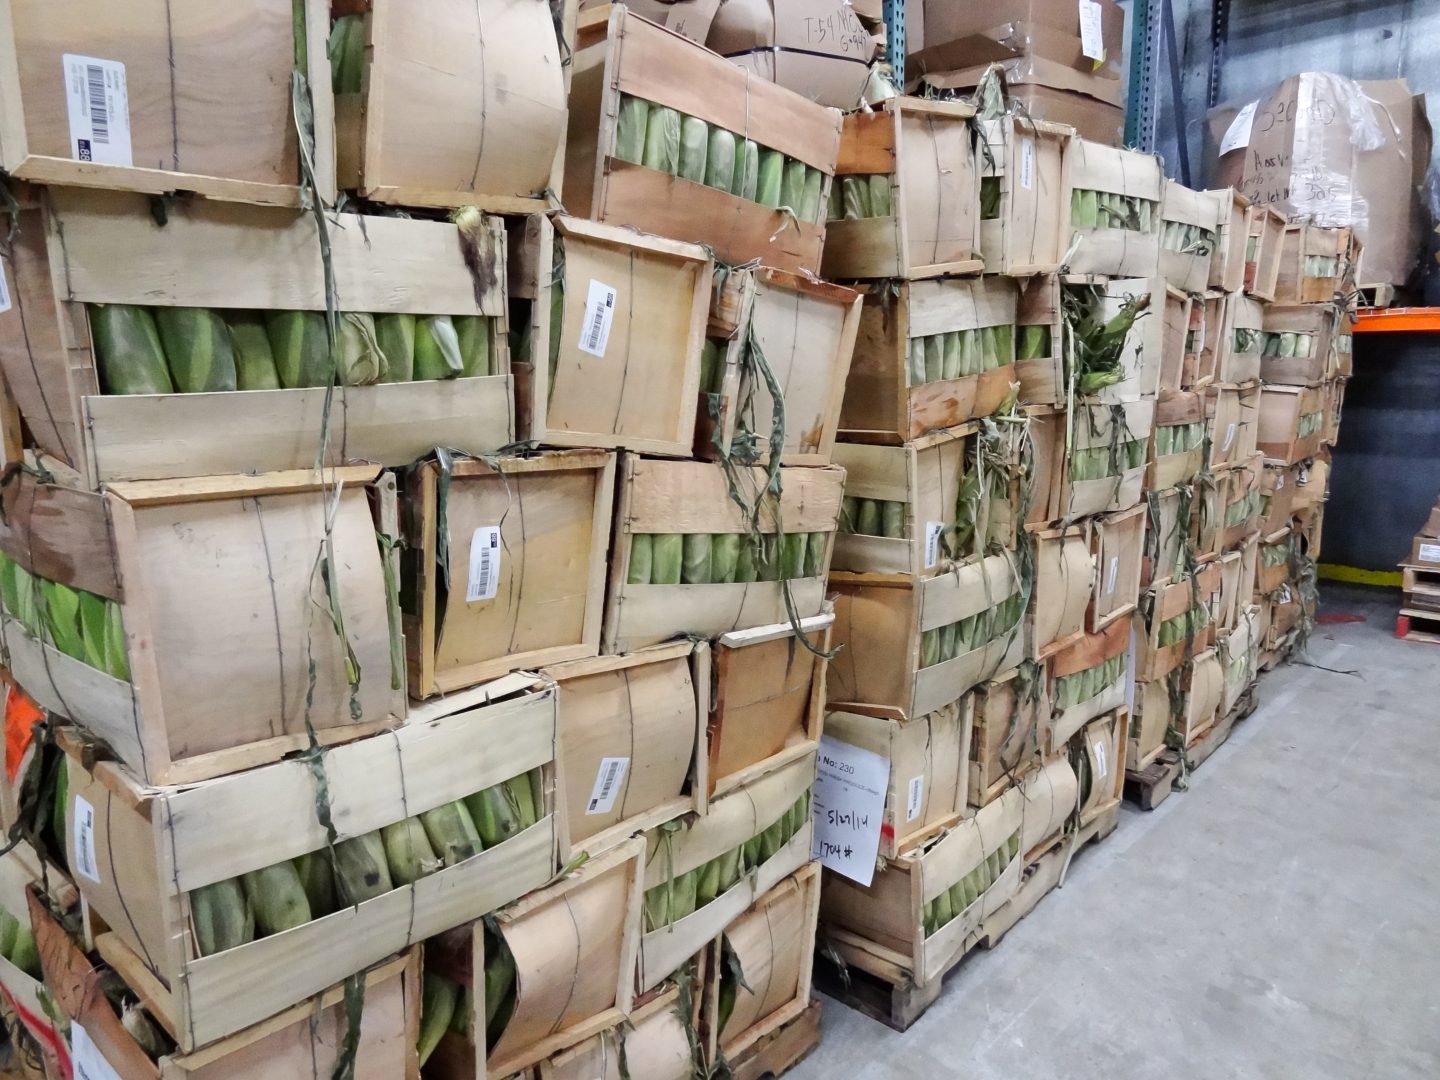 A stack of boxes covered in green leaves, forming a large pile.